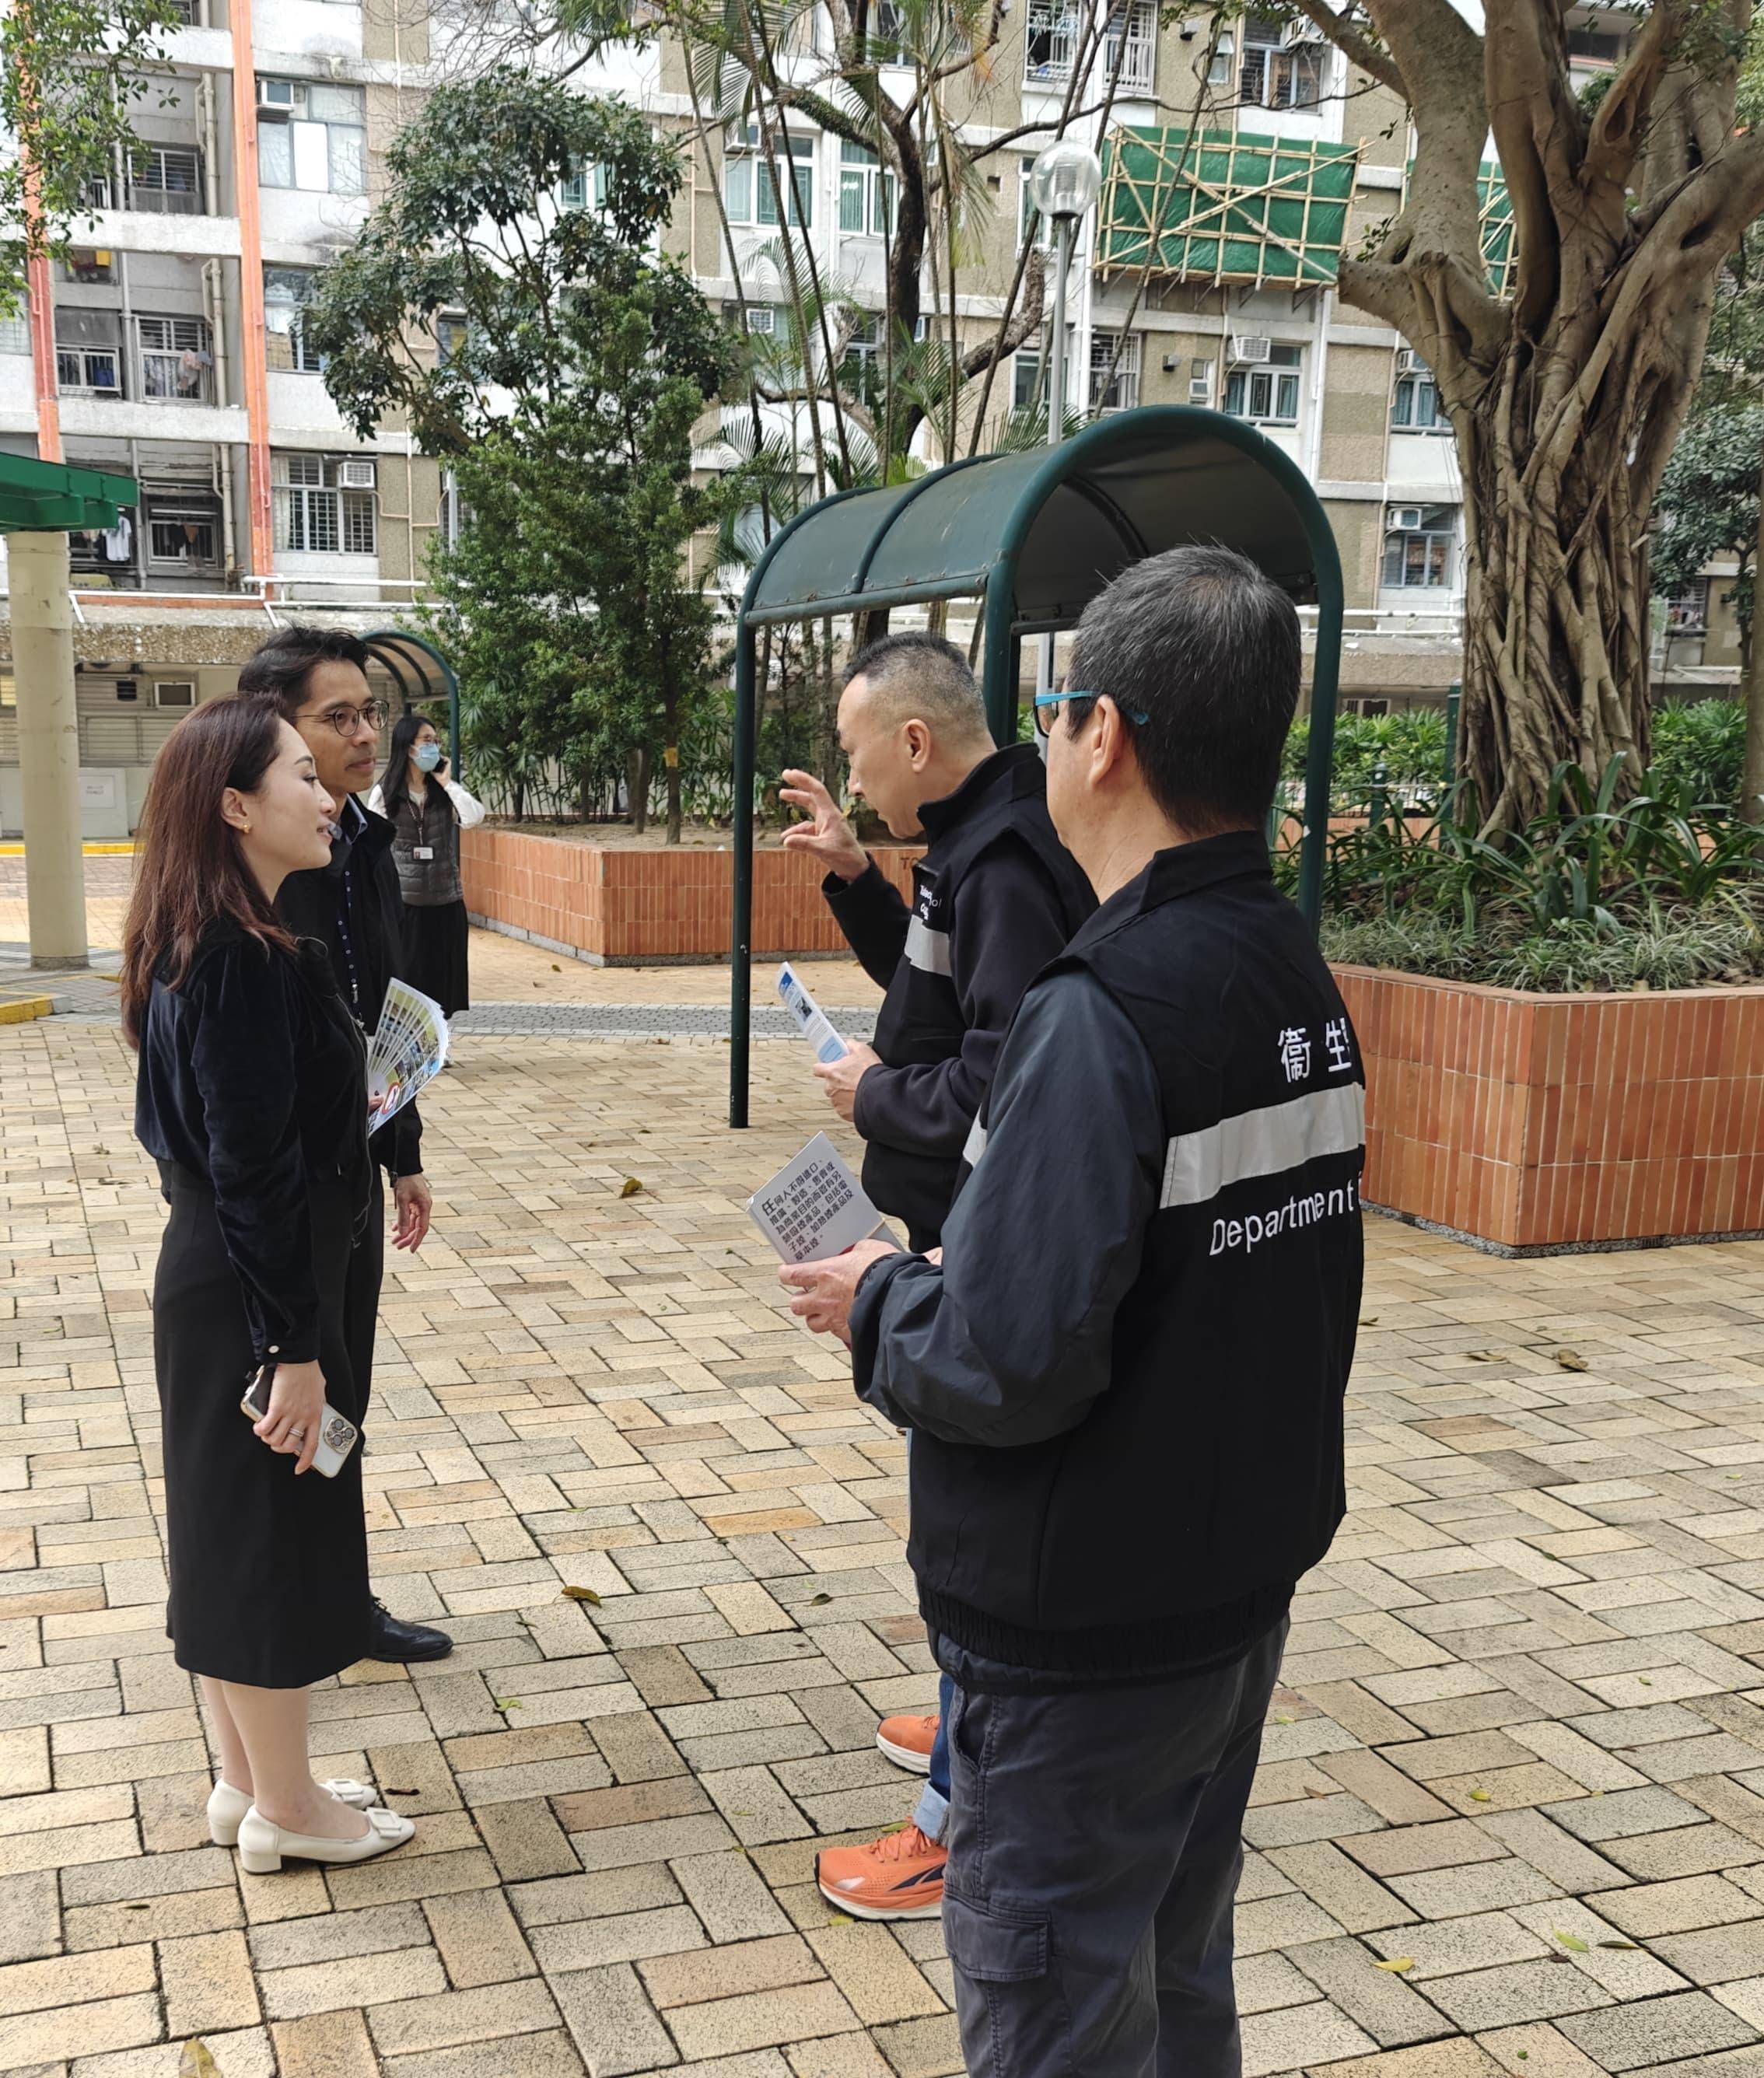 To step up enforcement actions to combat the distribution of smoking product leaflets in public housing estates, the Tobacco and Alcohol Control Office (TACO) of the Department of Health today (March 5) continued to carry out a joint operation with the Police and the Housing Department to conduct inspections and carry out publicity at two public housing estates in Kwun Tong District. In addition to patrolling the estates, officers from TACO provided estate security personnel and residents with information on what to do when a suspected violation is found. Members of the Kwun Tong District Council and the Area Committee (Kwun Tong) also joined today's operation and reminded residents not to defy the law.